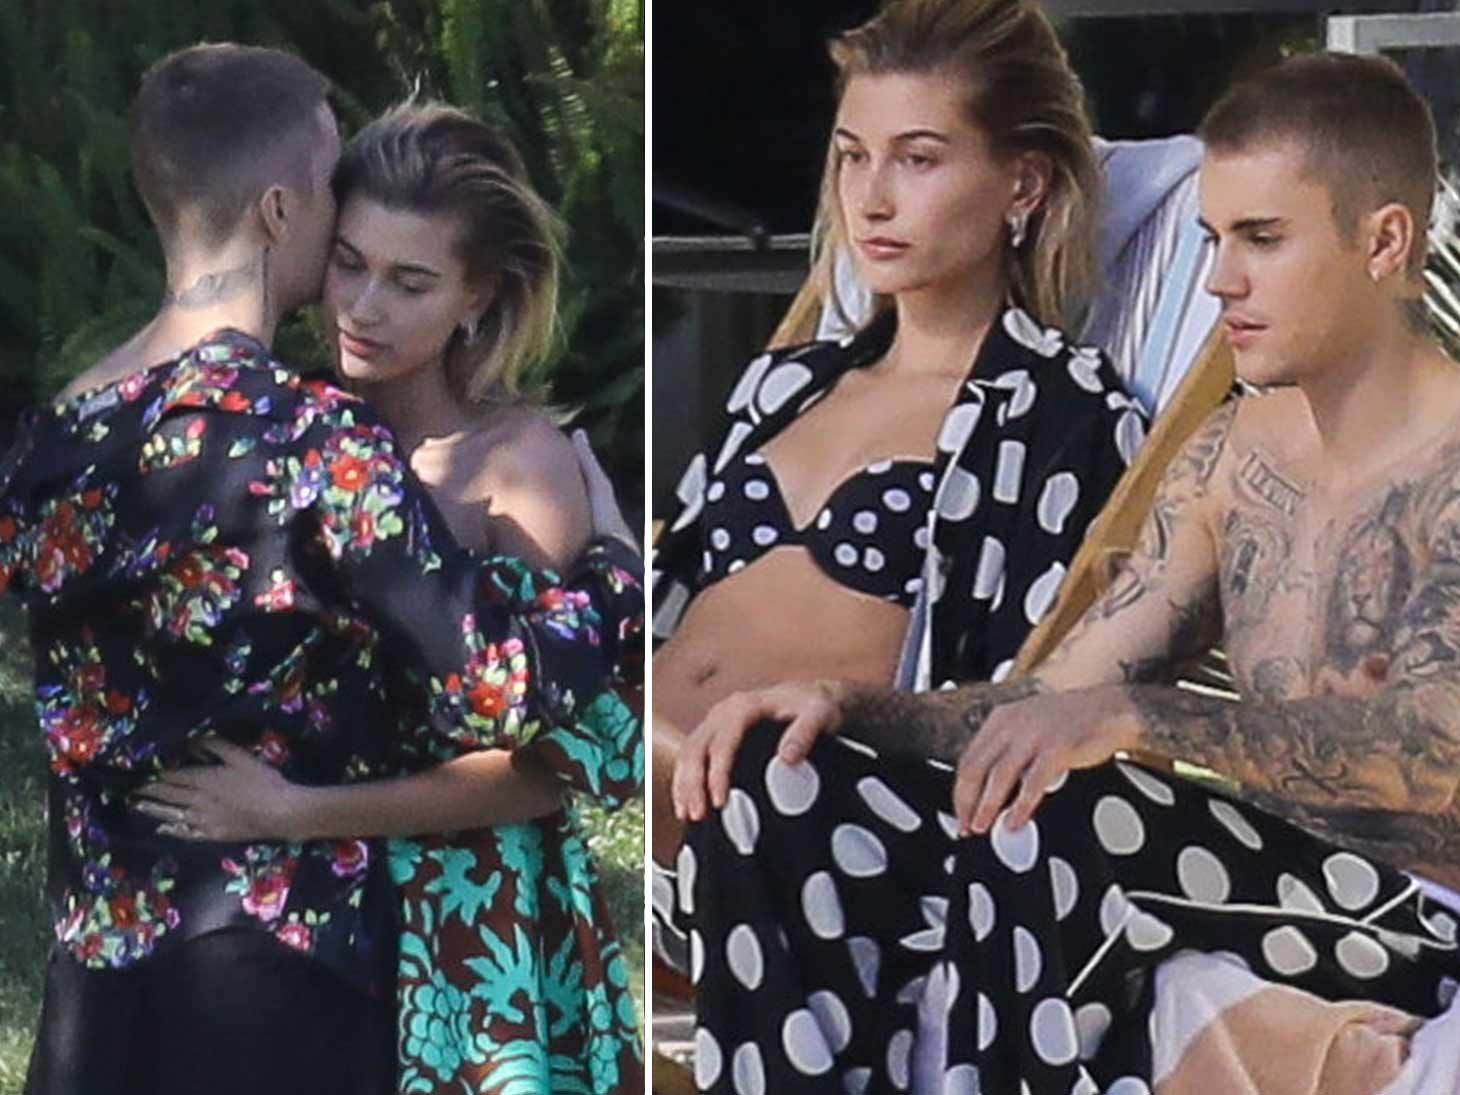 Hailey And Justin Bieber Have The Newlywed Glow In 1st Photo Shoot As